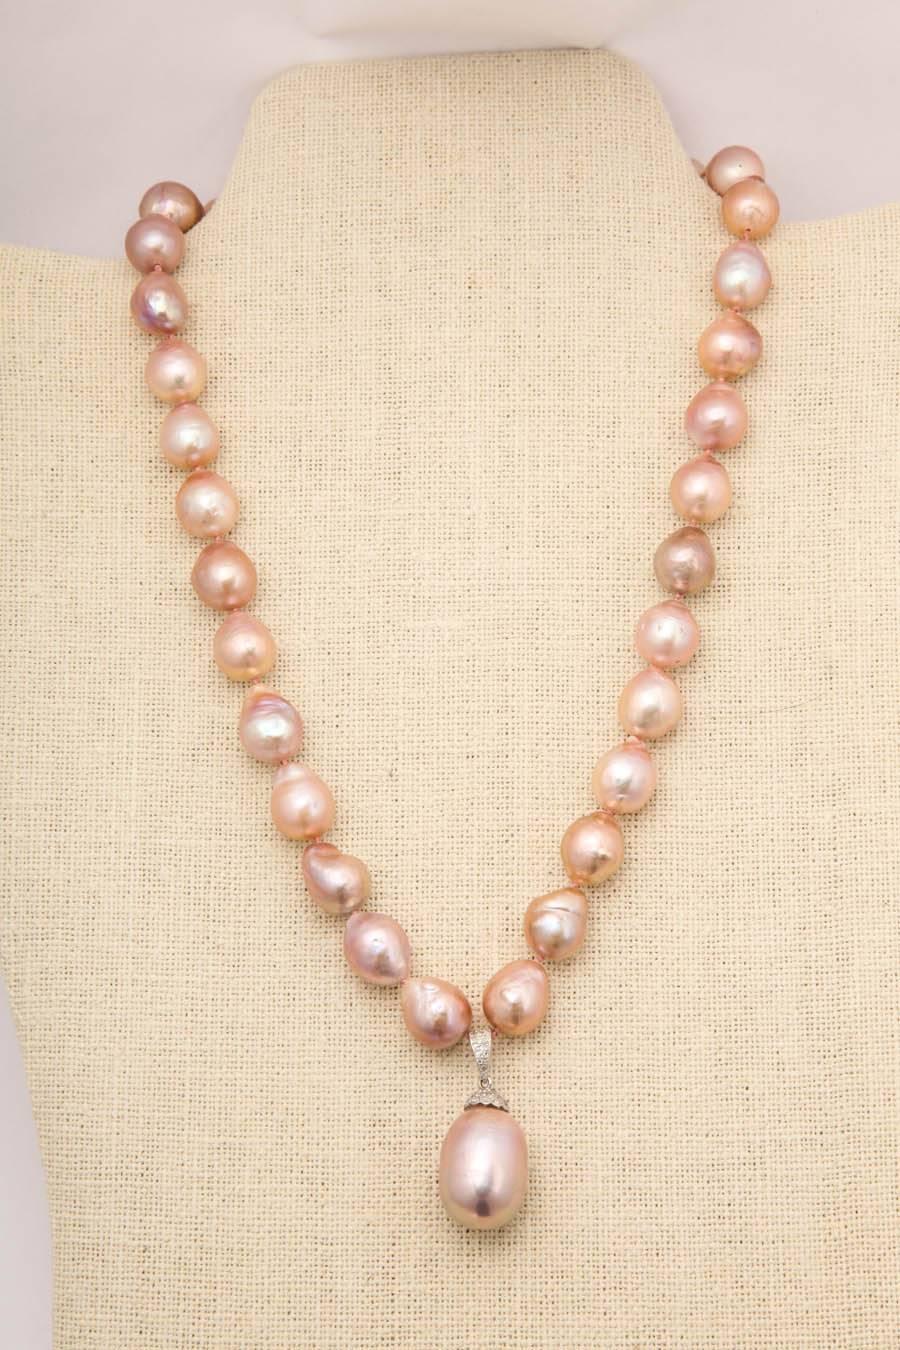 This  wonderful necklace is made of 10 x 14 mm baroque fresh water pink pearls with a 14kt white gold and diamond pearl cap and bale. The center drop pearl is 20 mm and the total pendant length is 35 mm long. The necklace is finished with a 14 kt